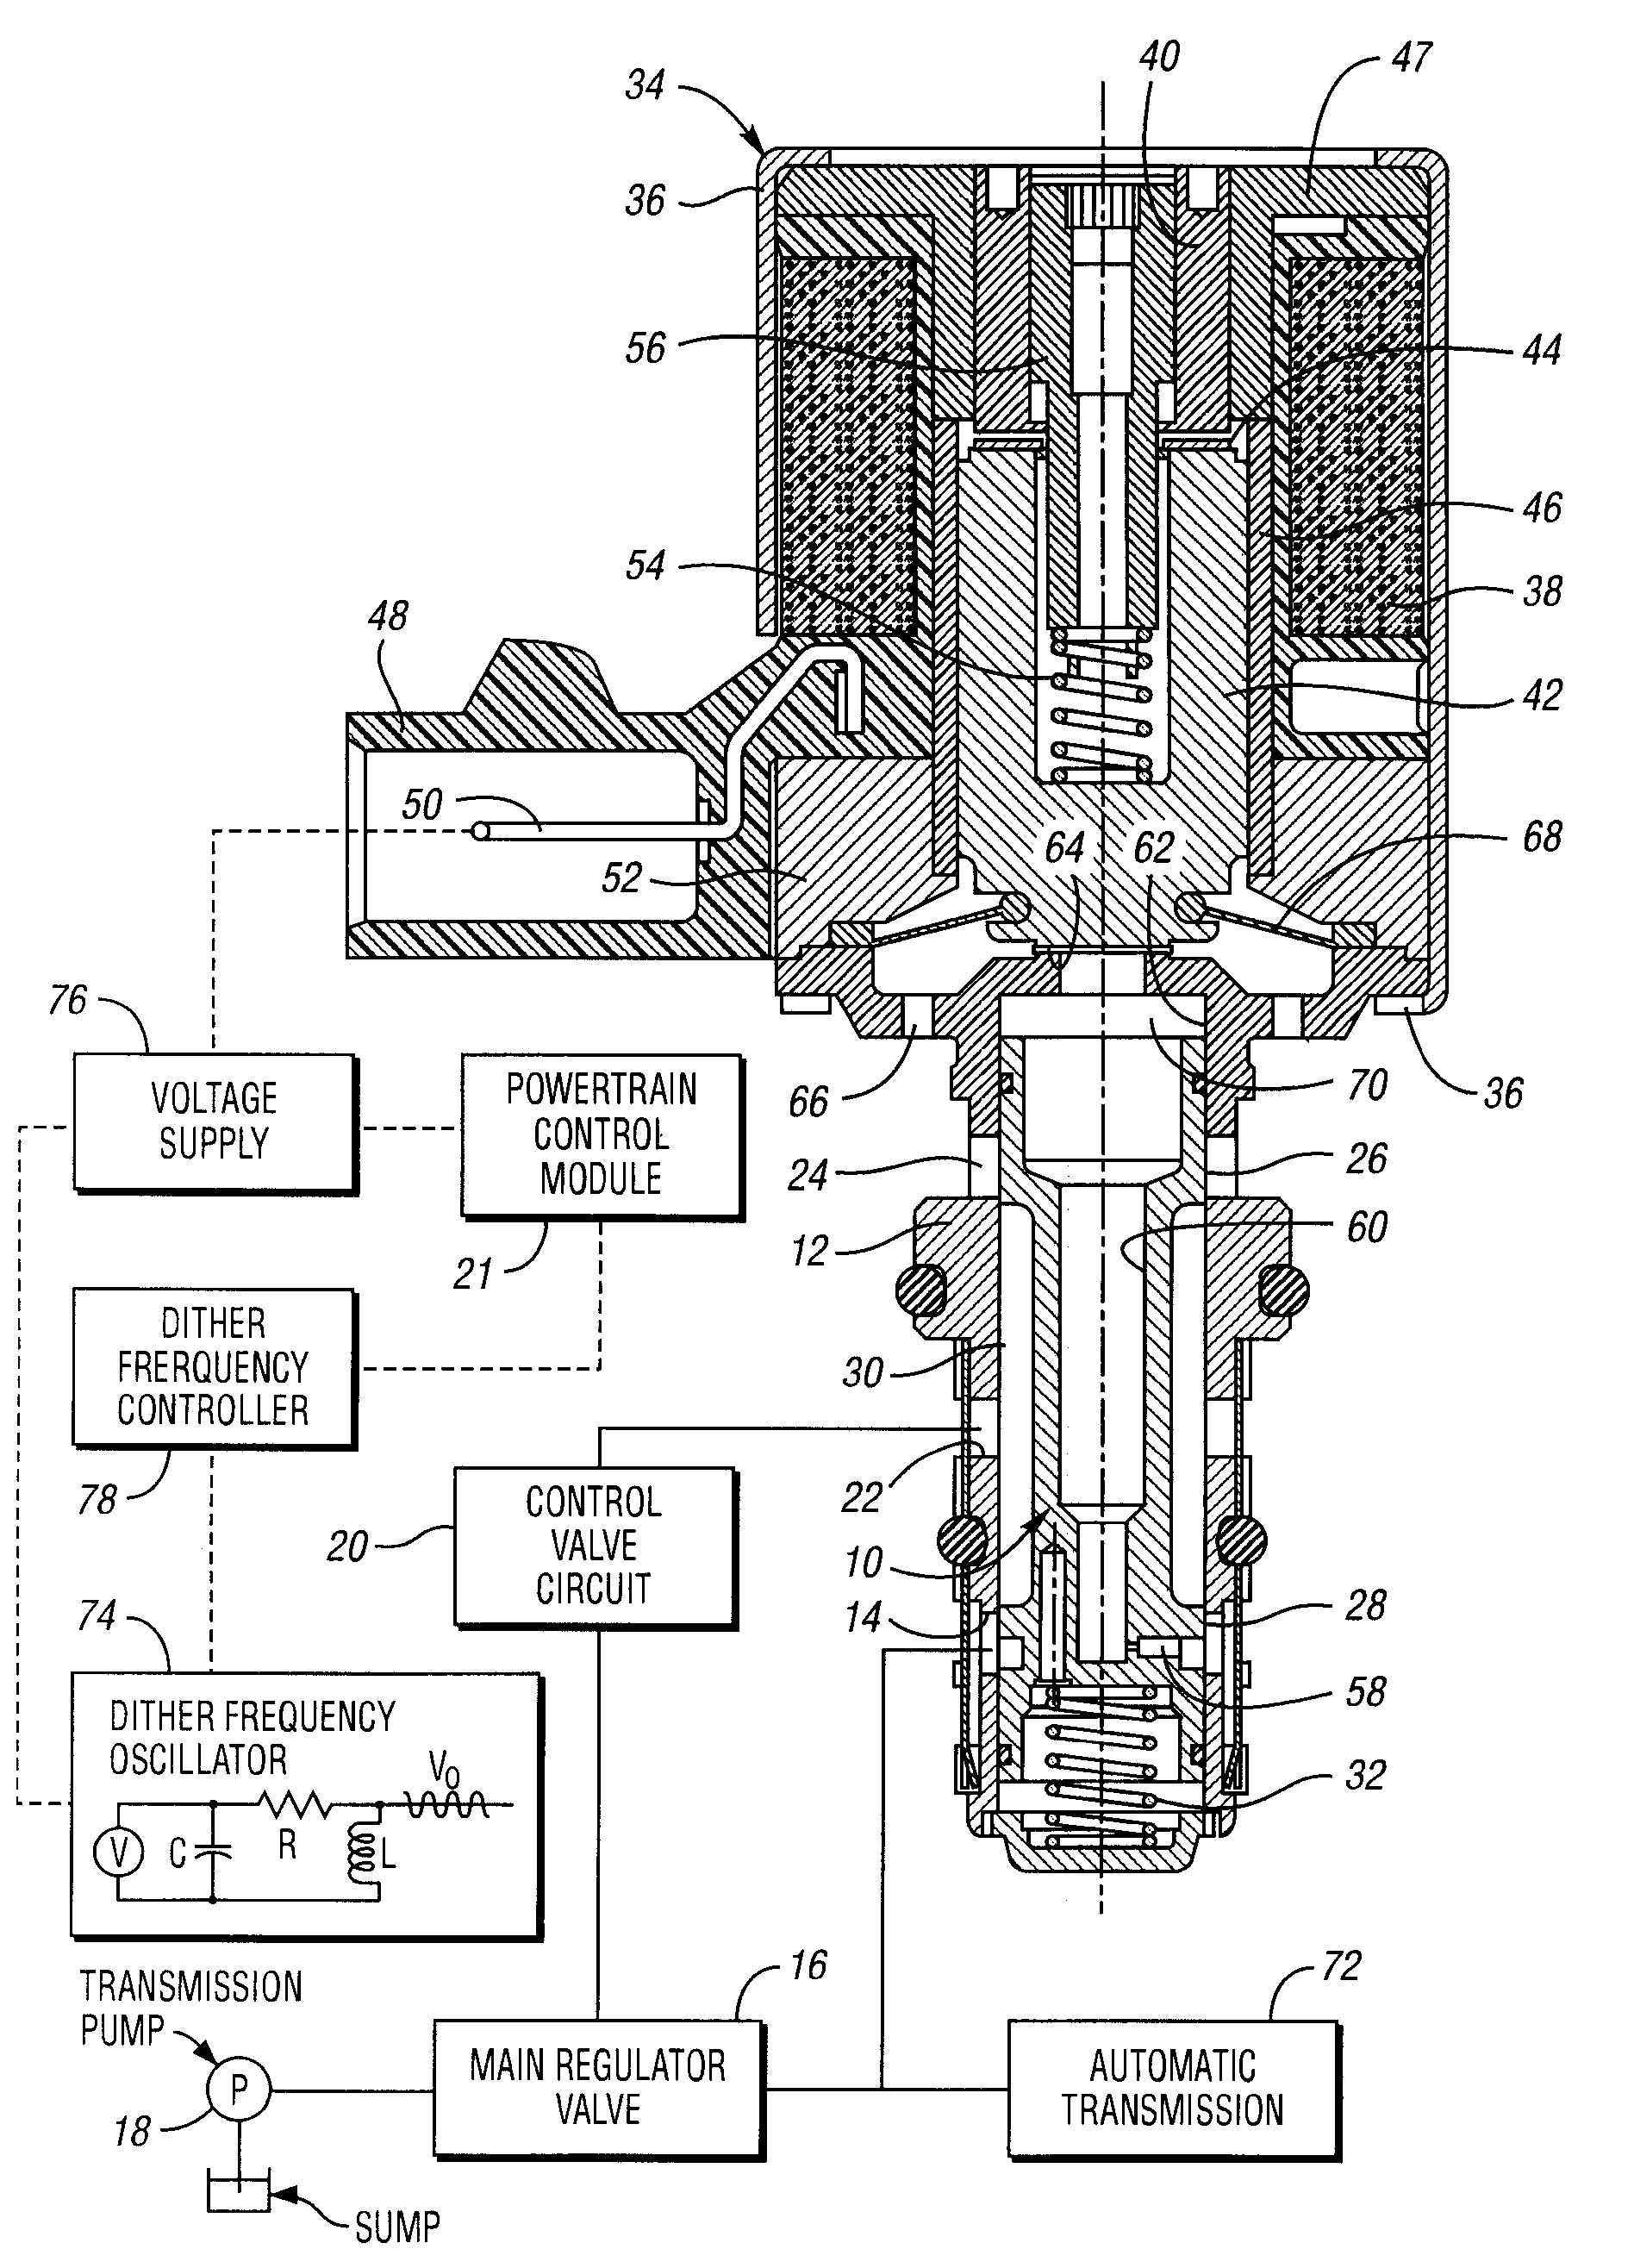 A control method and controller for a solenoid-operated electrohydraulic control valve